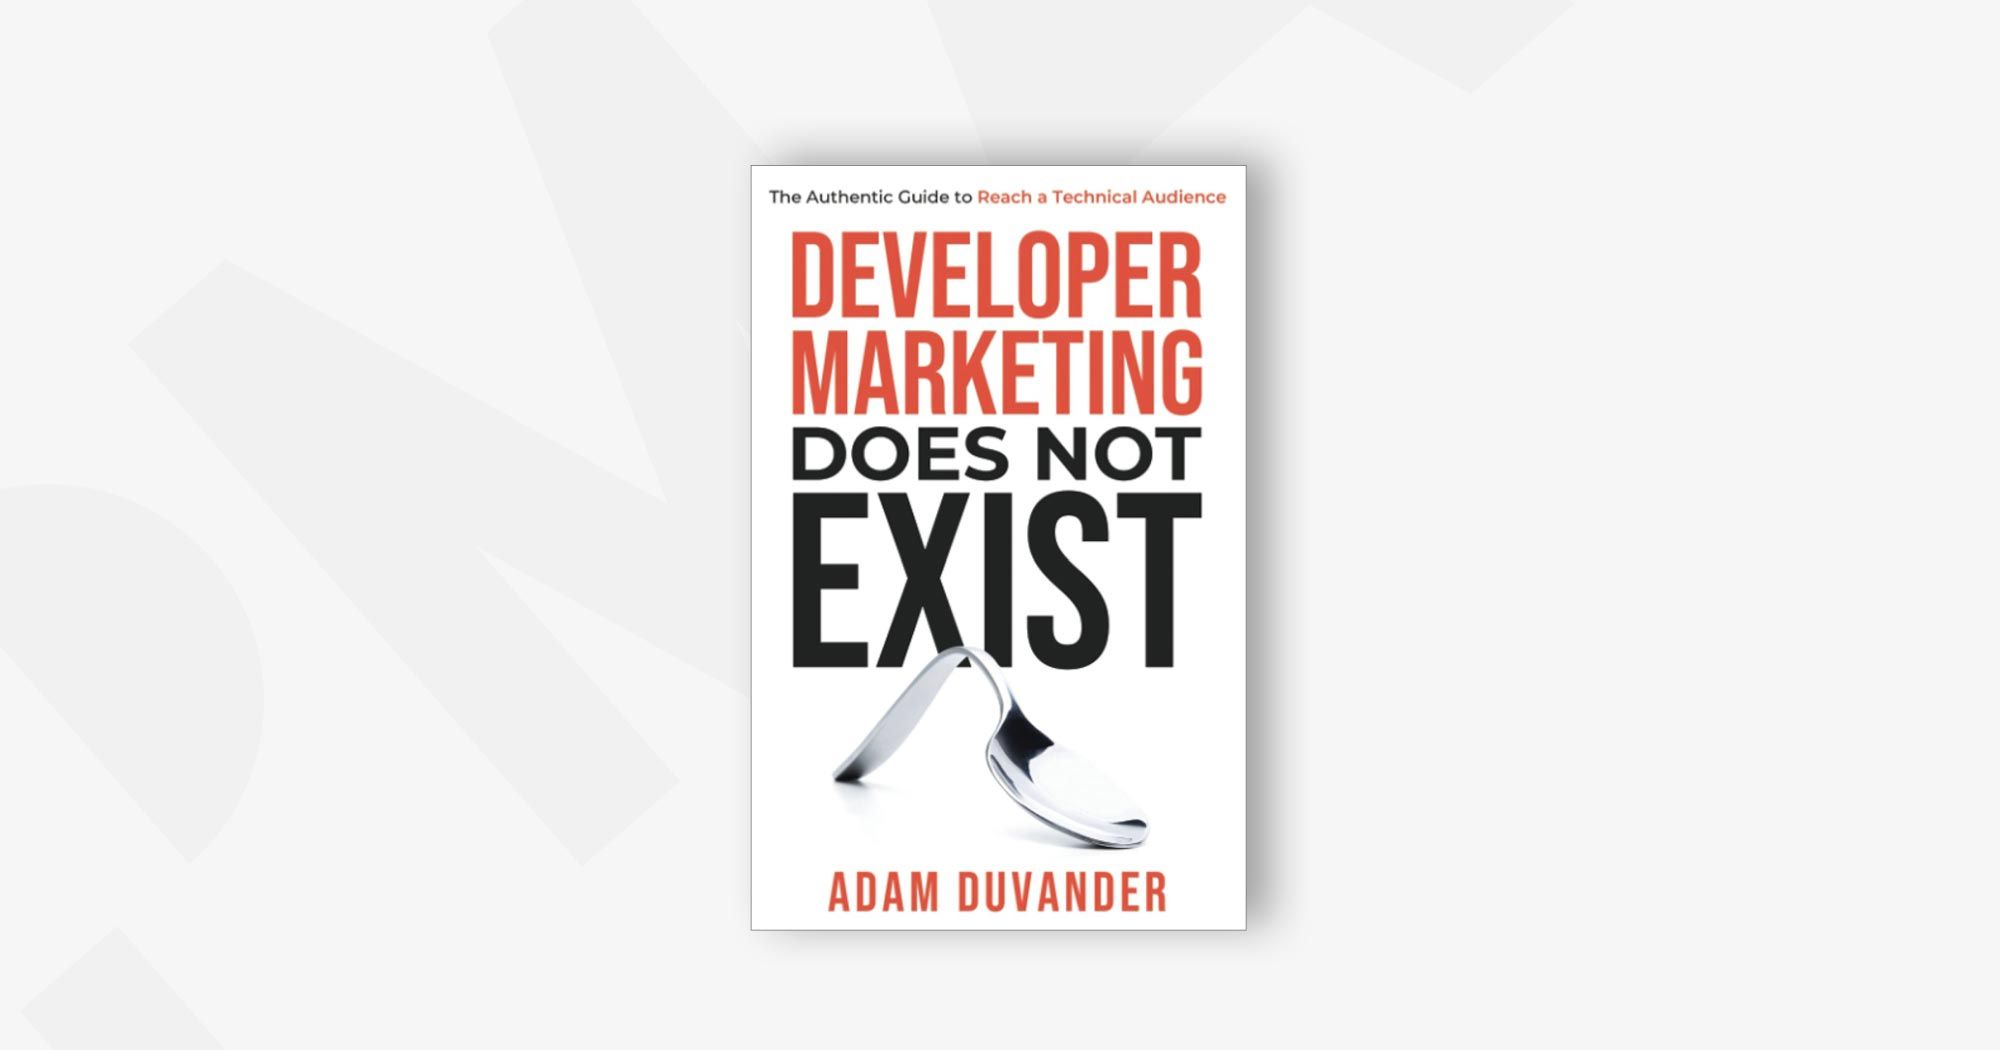 Developer Marketing Does Not Exist: The Authentic Guide to Reach a Technical Audience – Adam DuVander